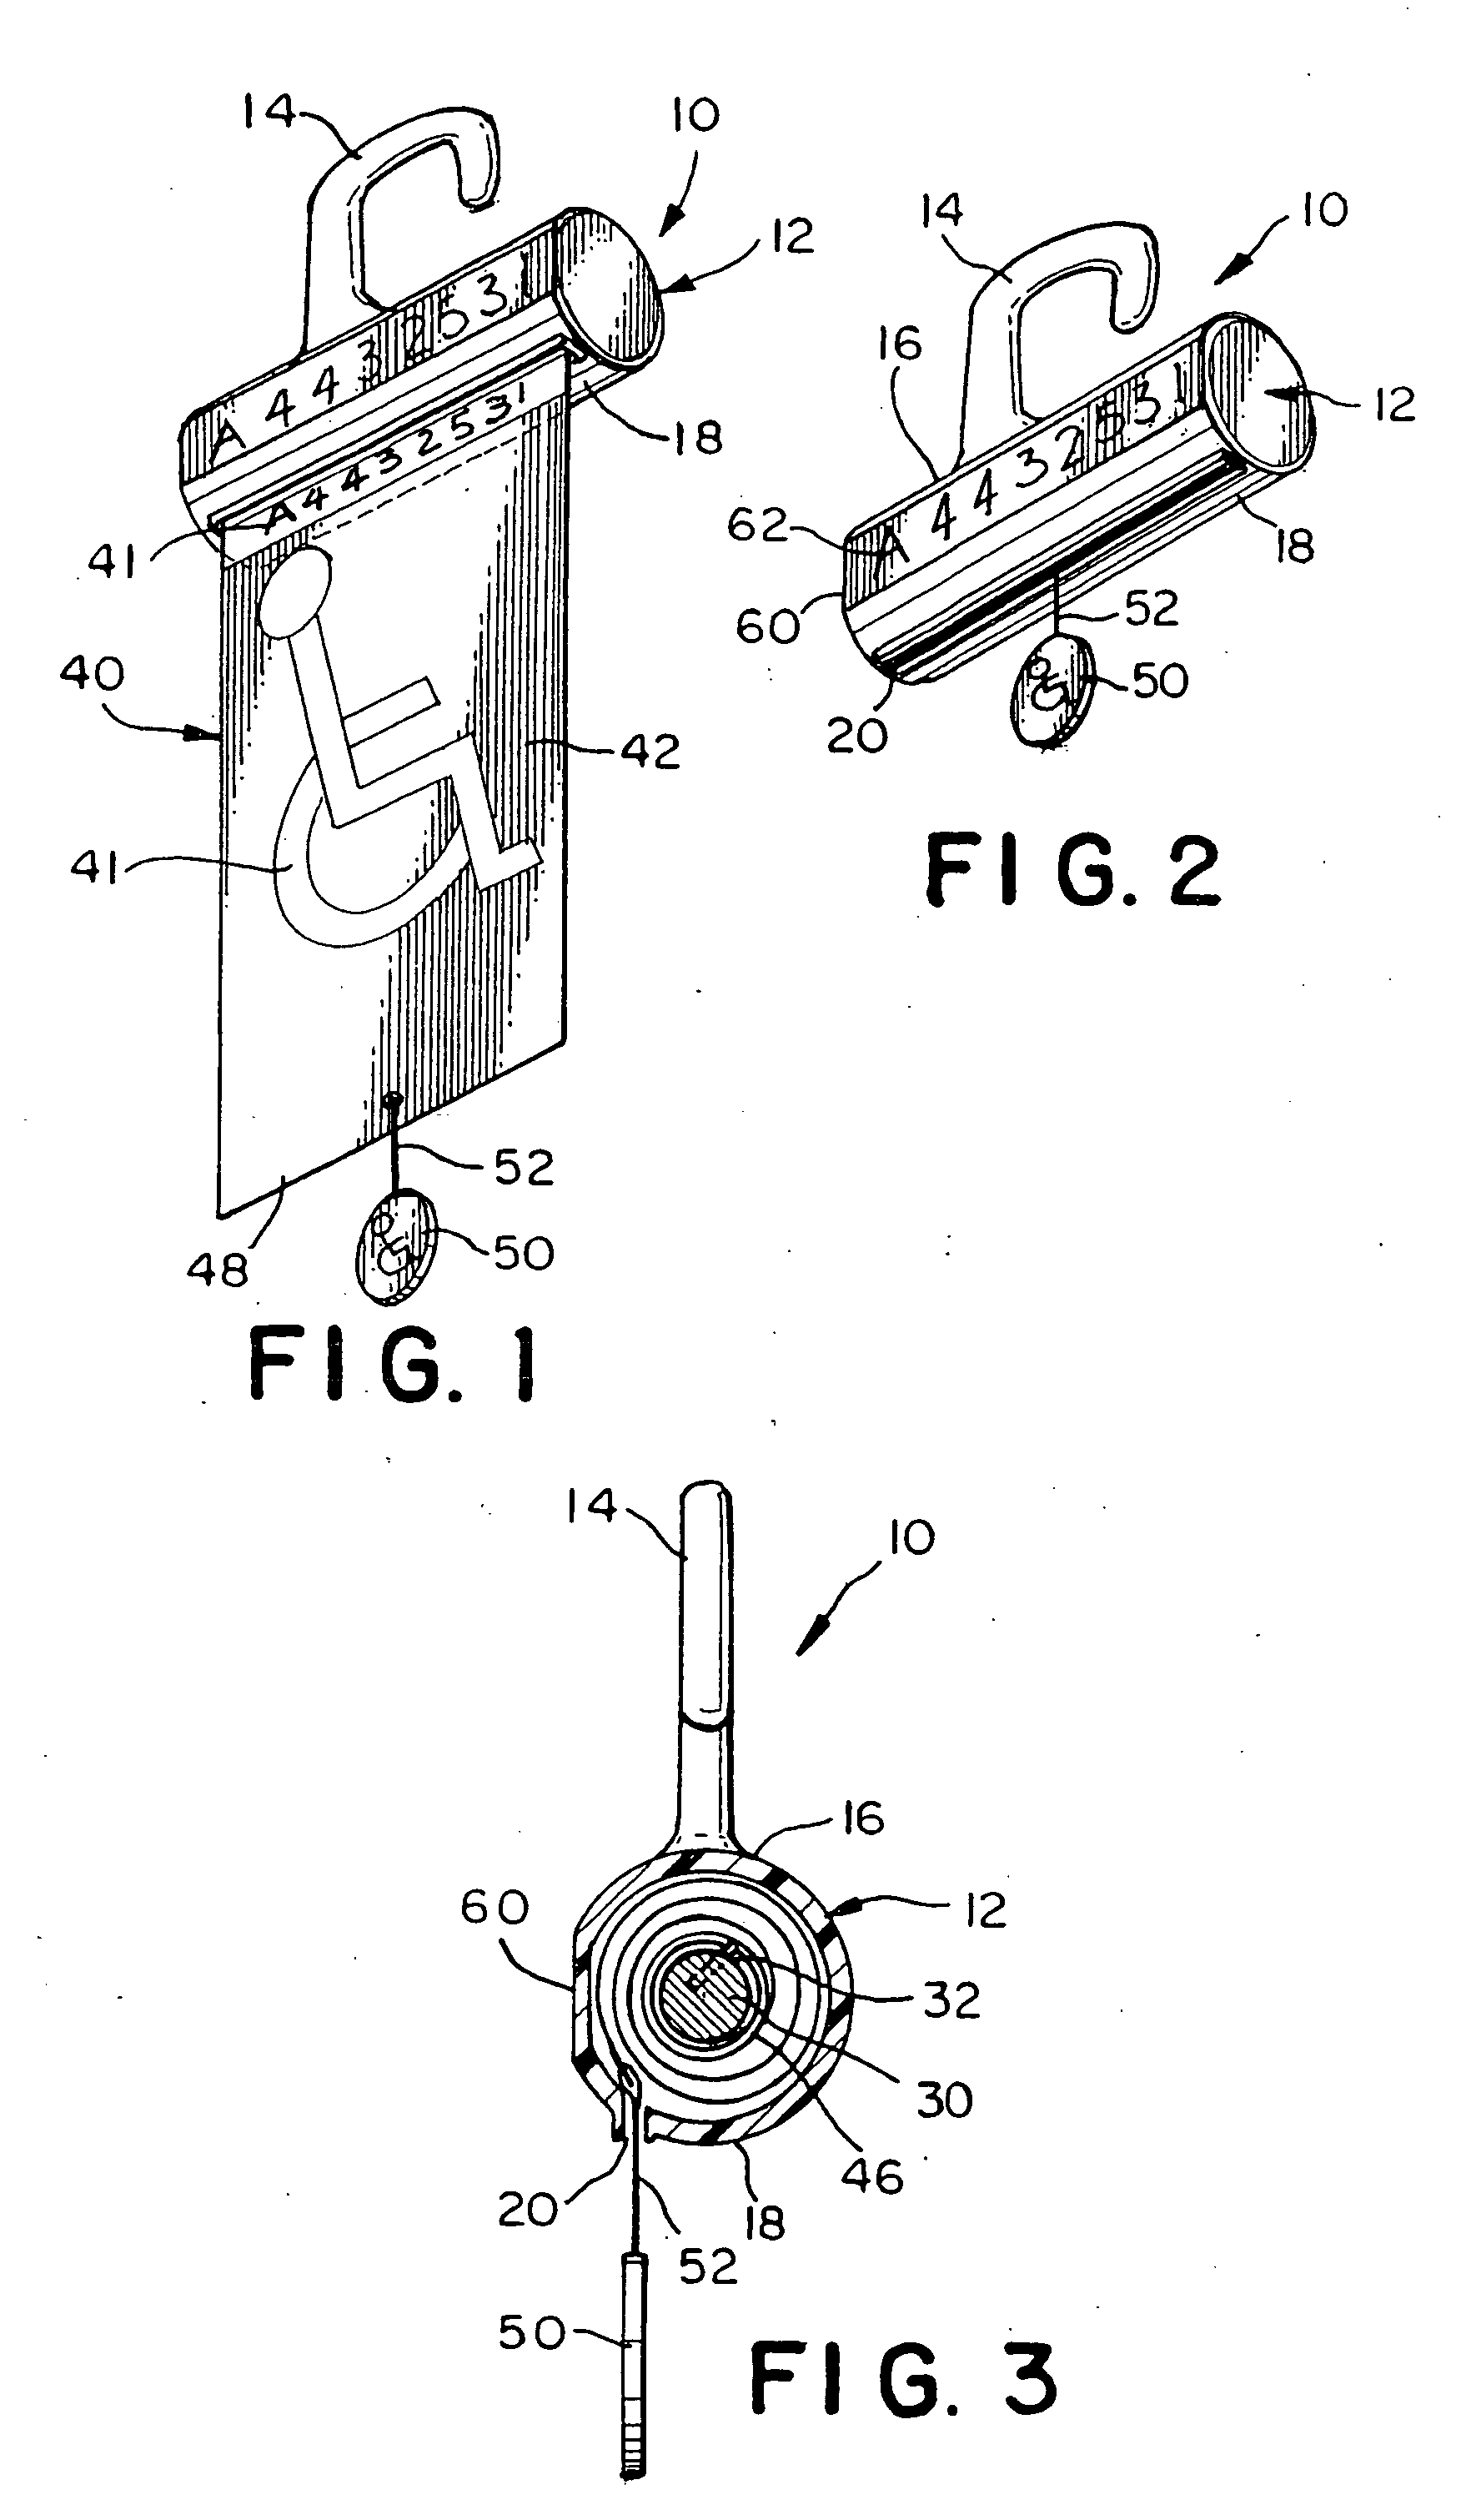 Device for displaying a disabled parking permit